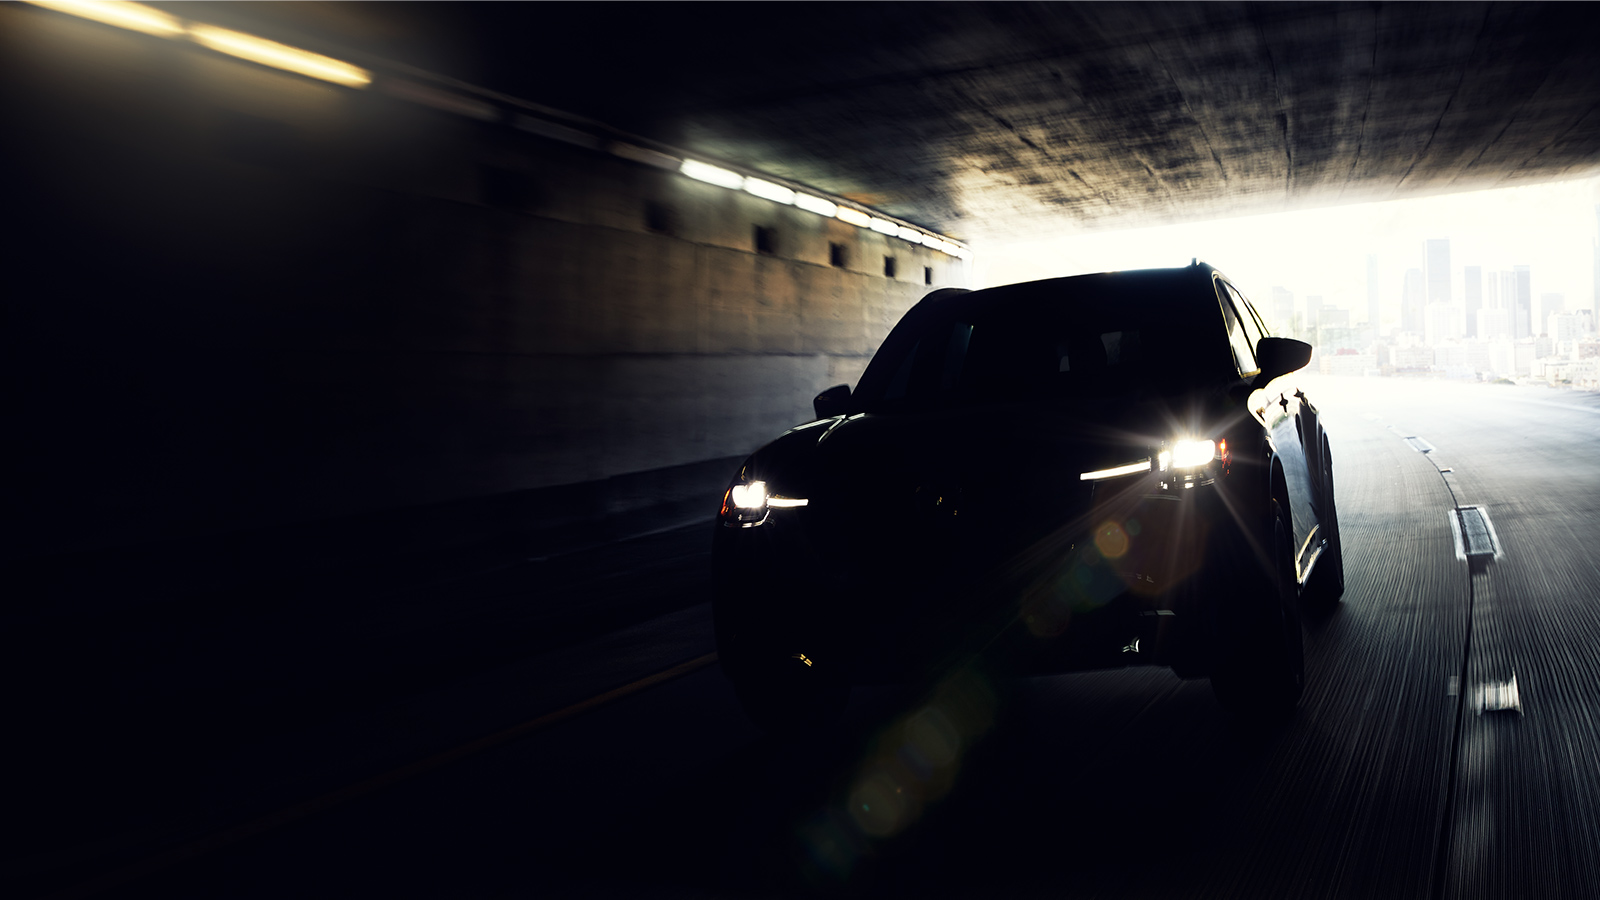 Shadowed shiloutte of CX-90 vehicle driving through a dark tunnel.